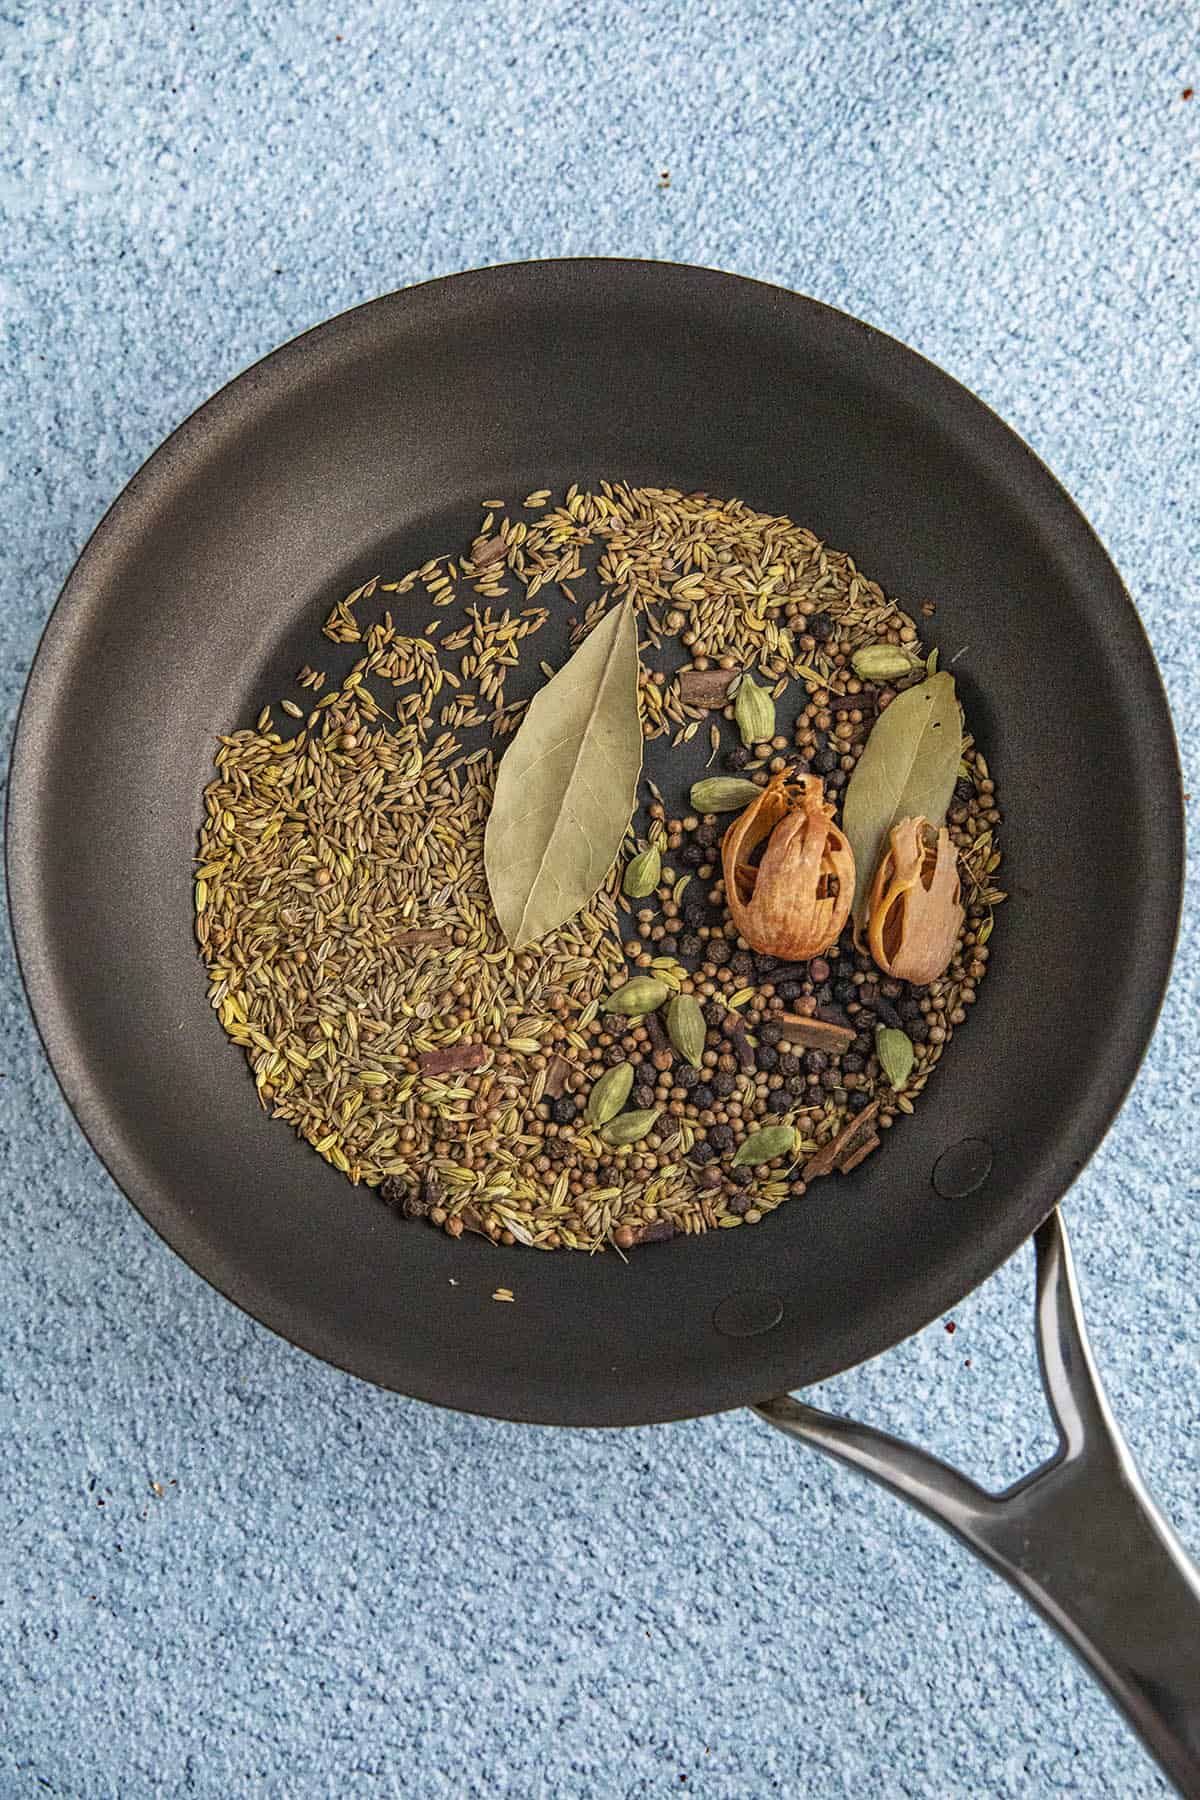 Toasting seeds and spices in a hot pan to make Garam Masala